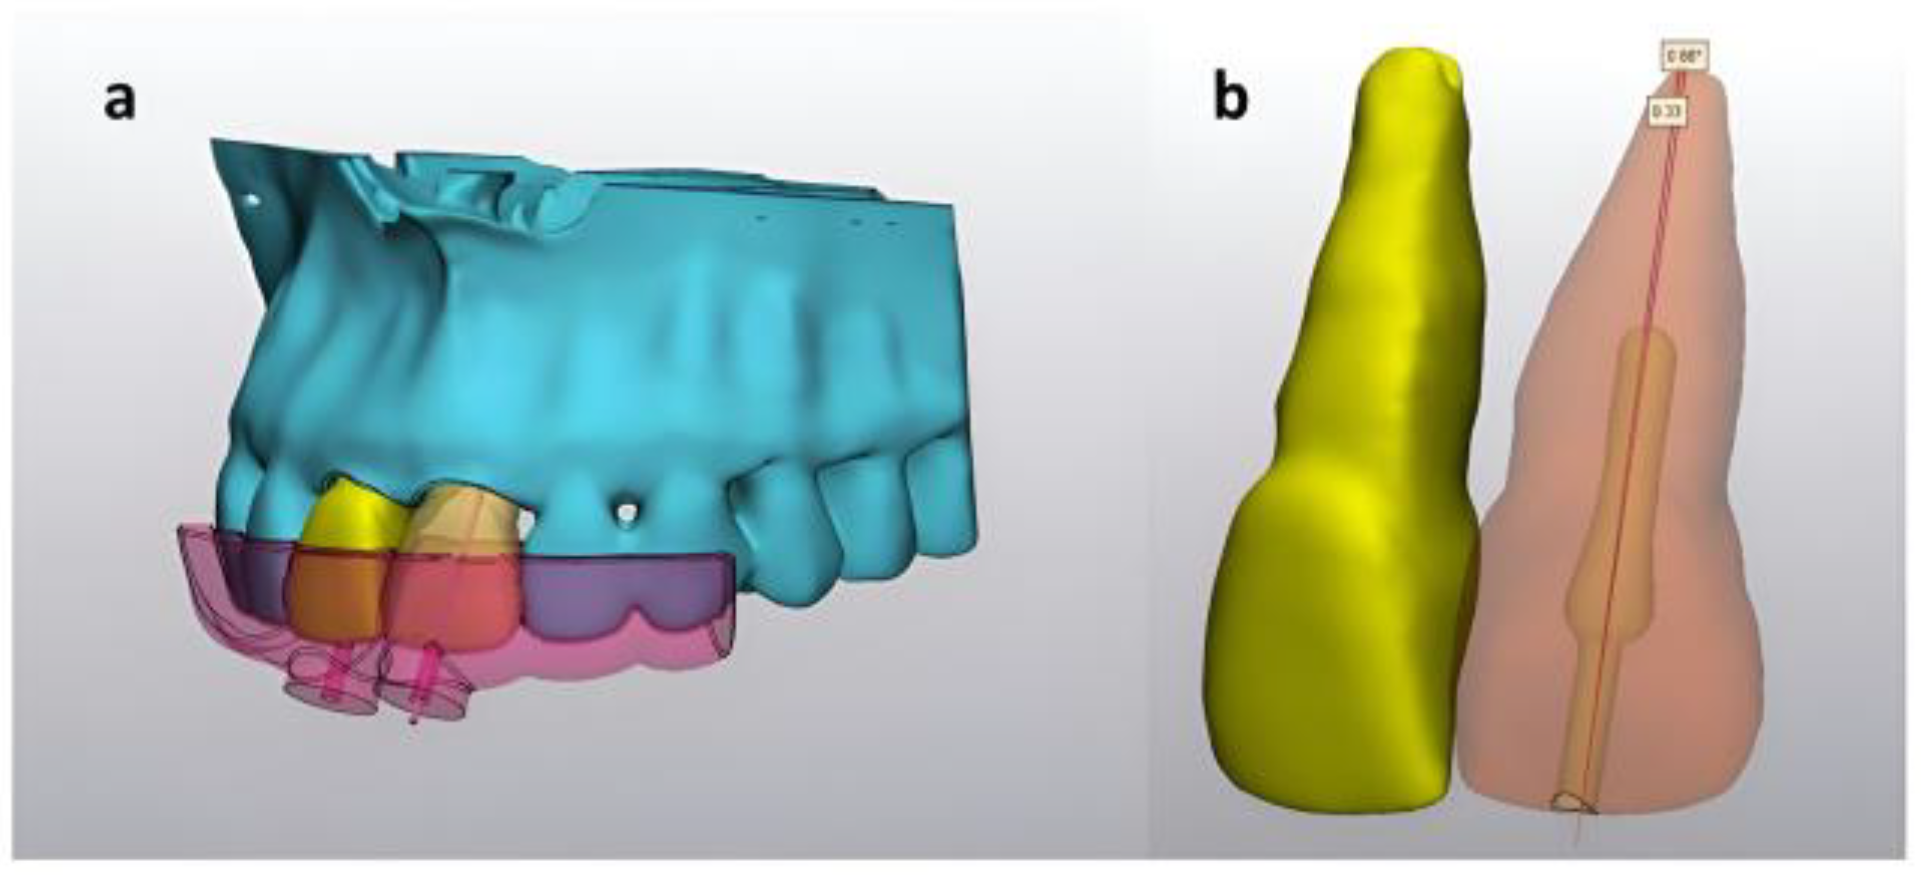 The 3D model of the root canal system of the sample presented in Fig.